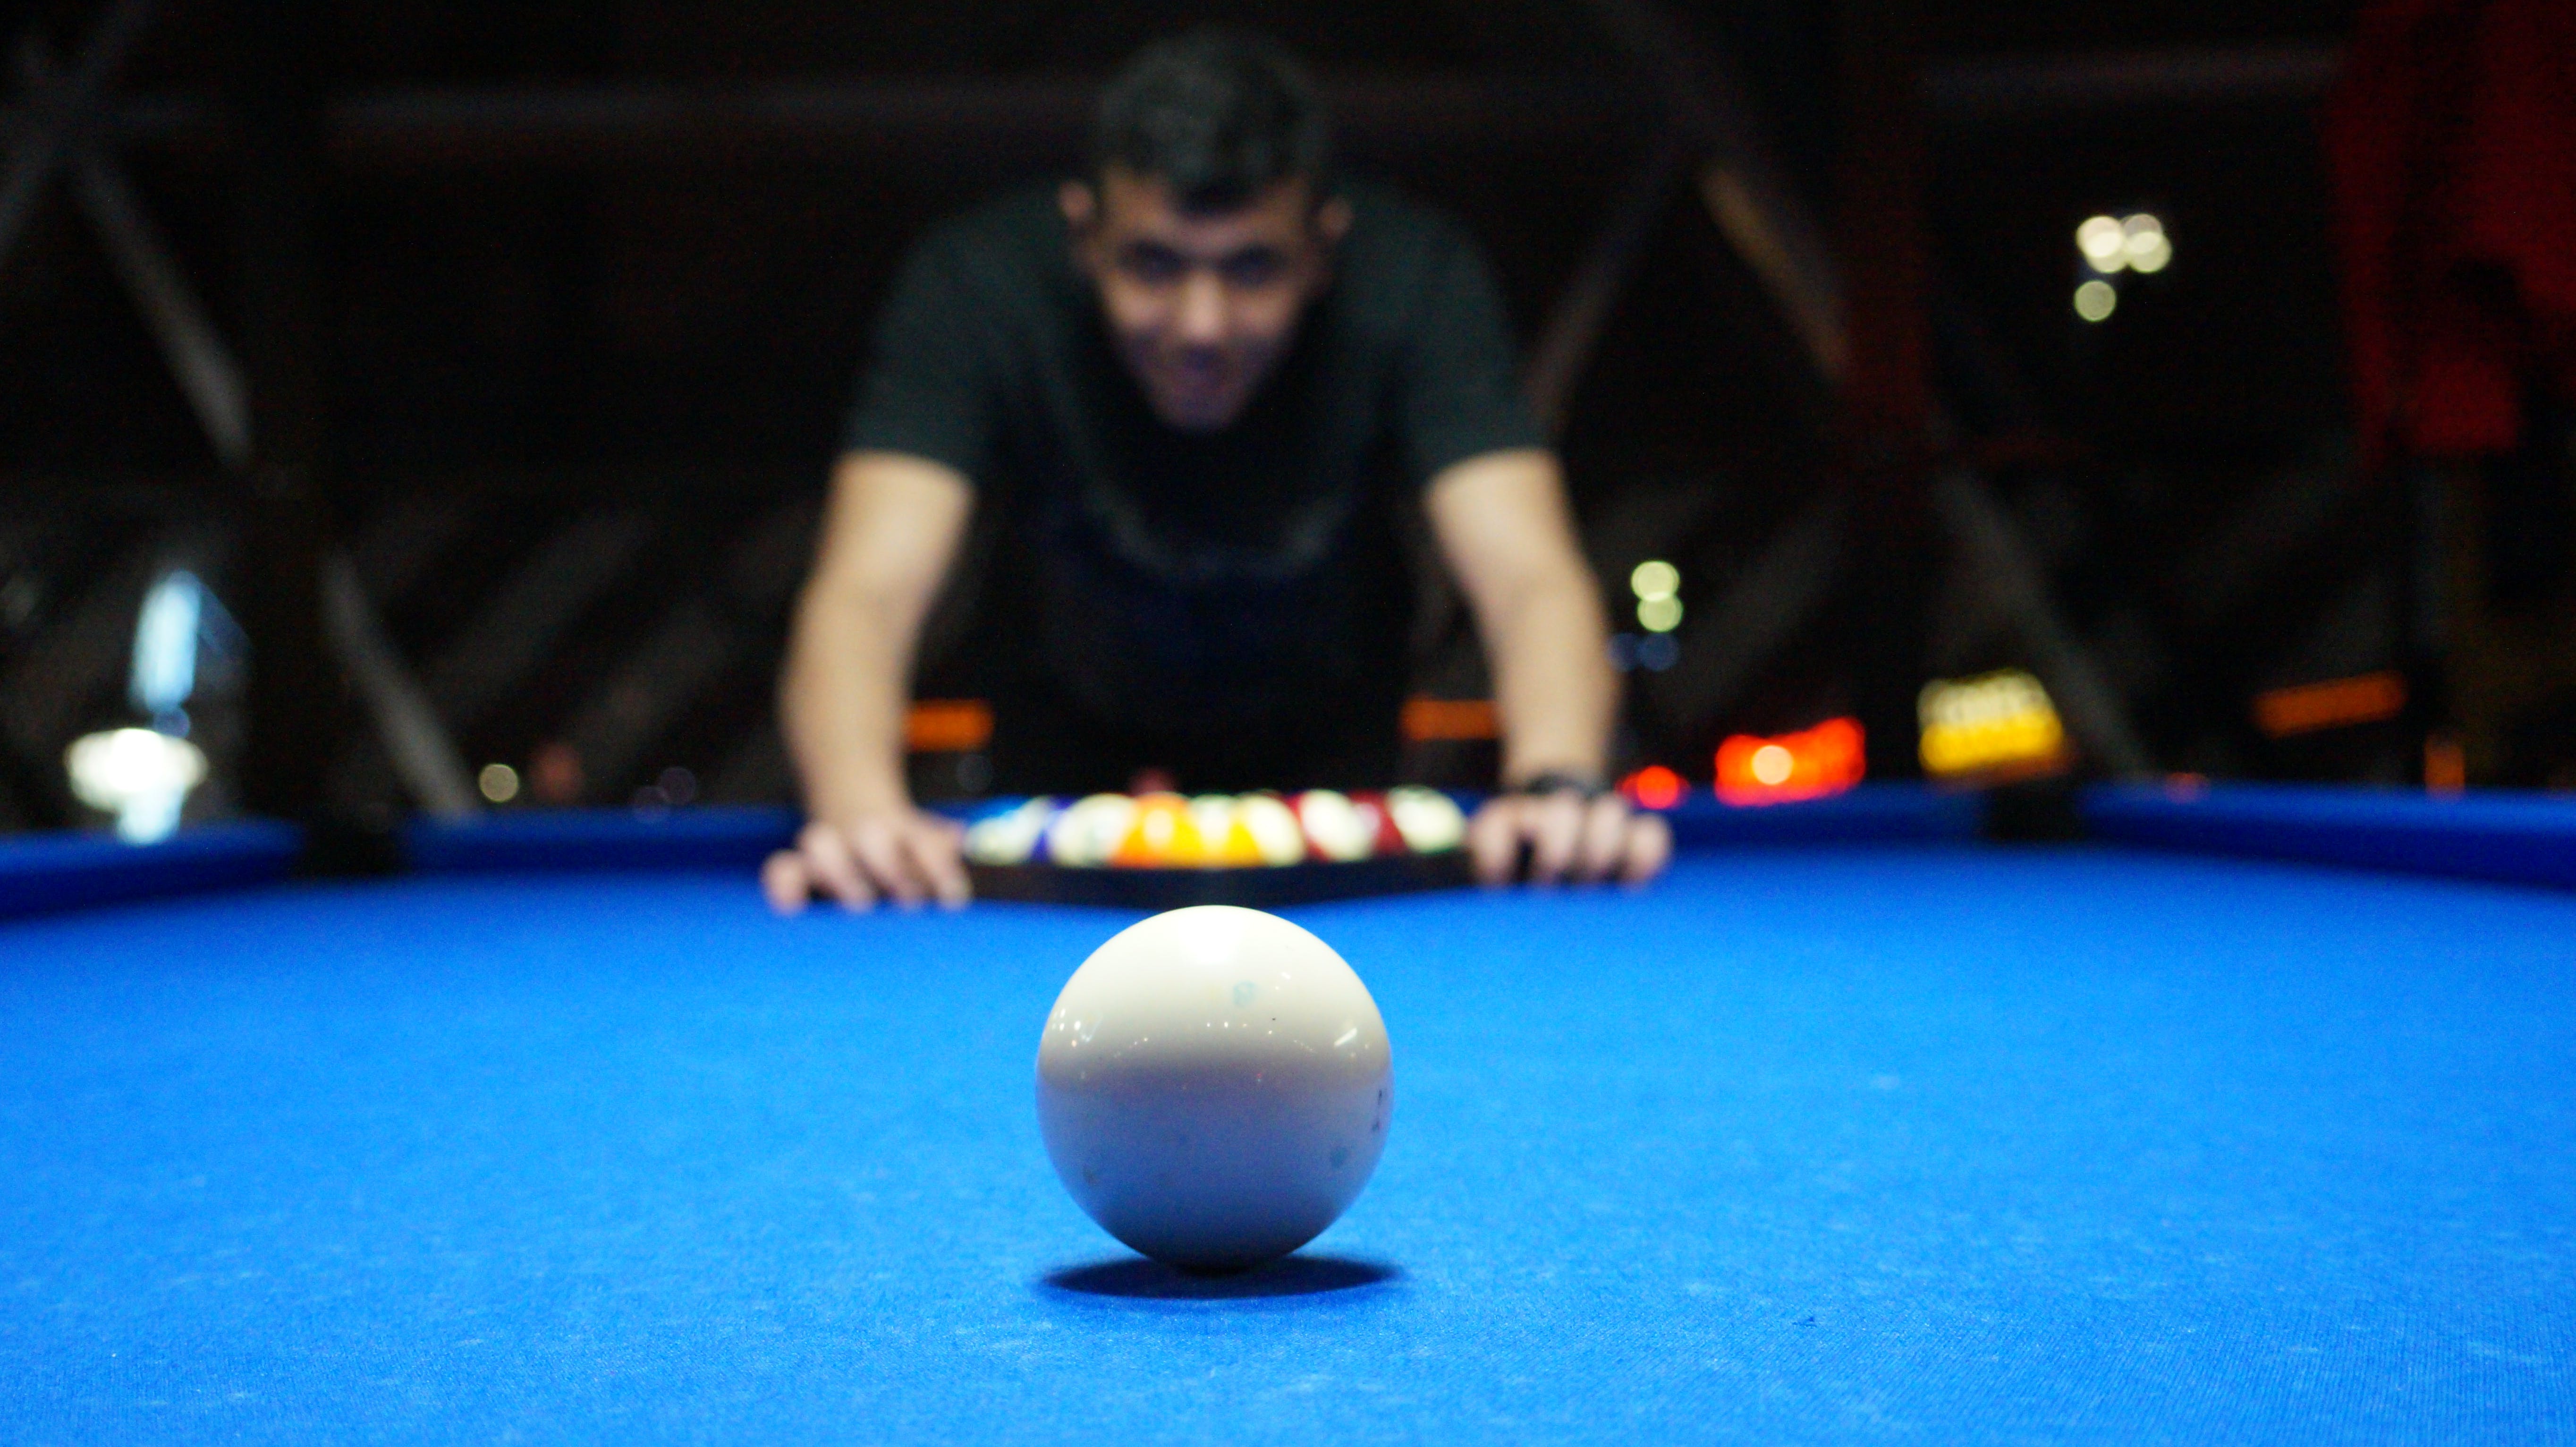 Pooking - Billiards City: Learn How to Play